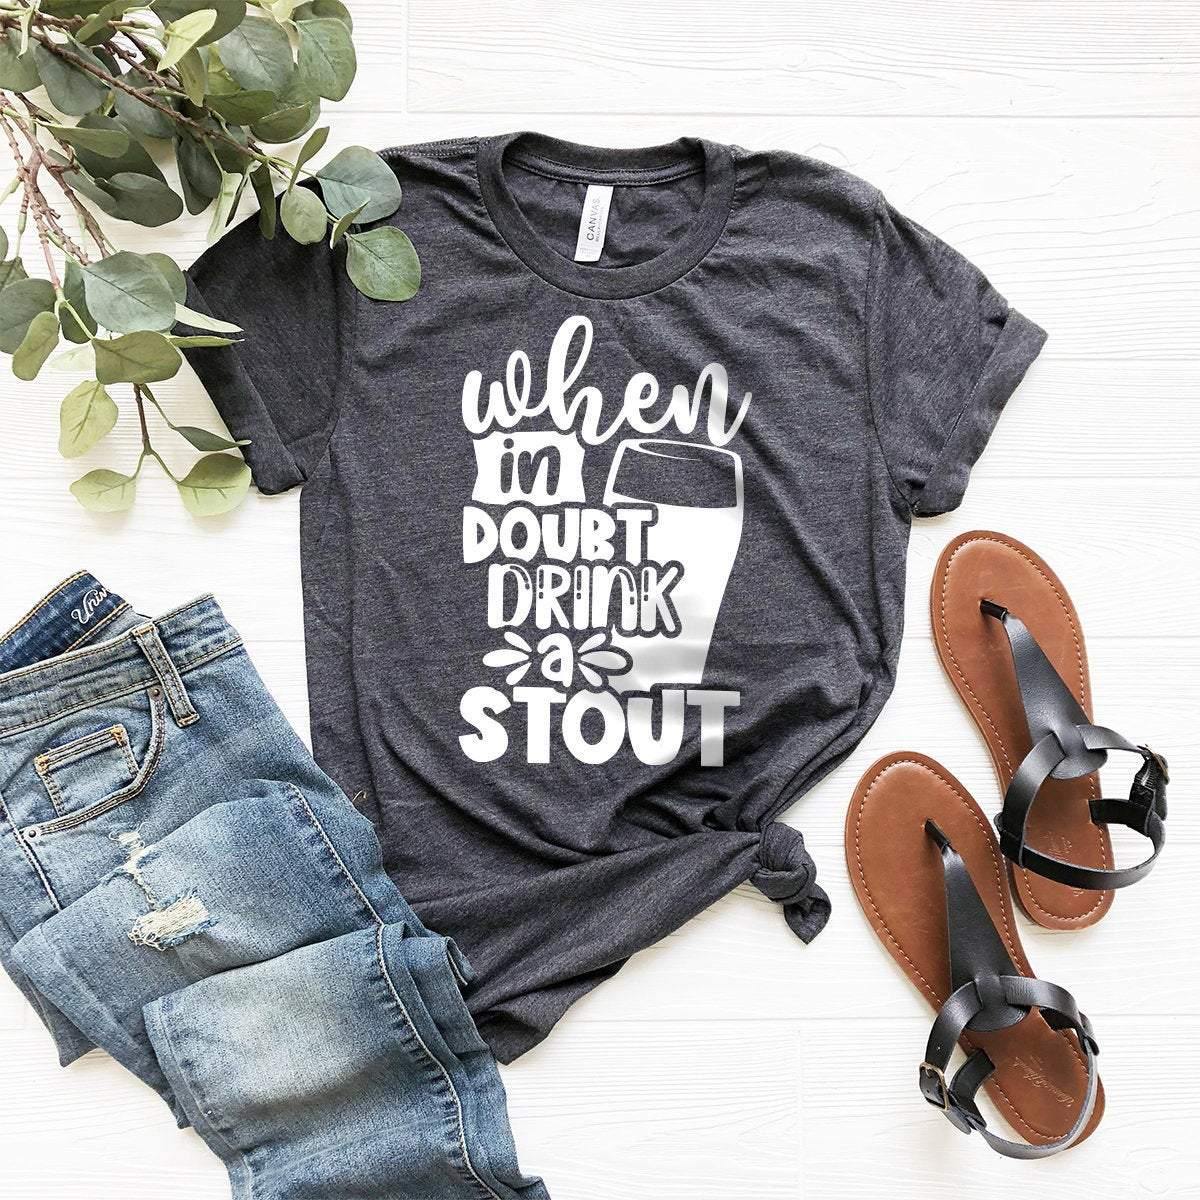 Beer Lover T-Shirt, Beer Drinker Tee, When In Doubt Drink A Stout Shirt, Funny Beer Shirt, Day Drinking Shirt, Concert Shirt, Beer Tee - Fastdeliverytees.com